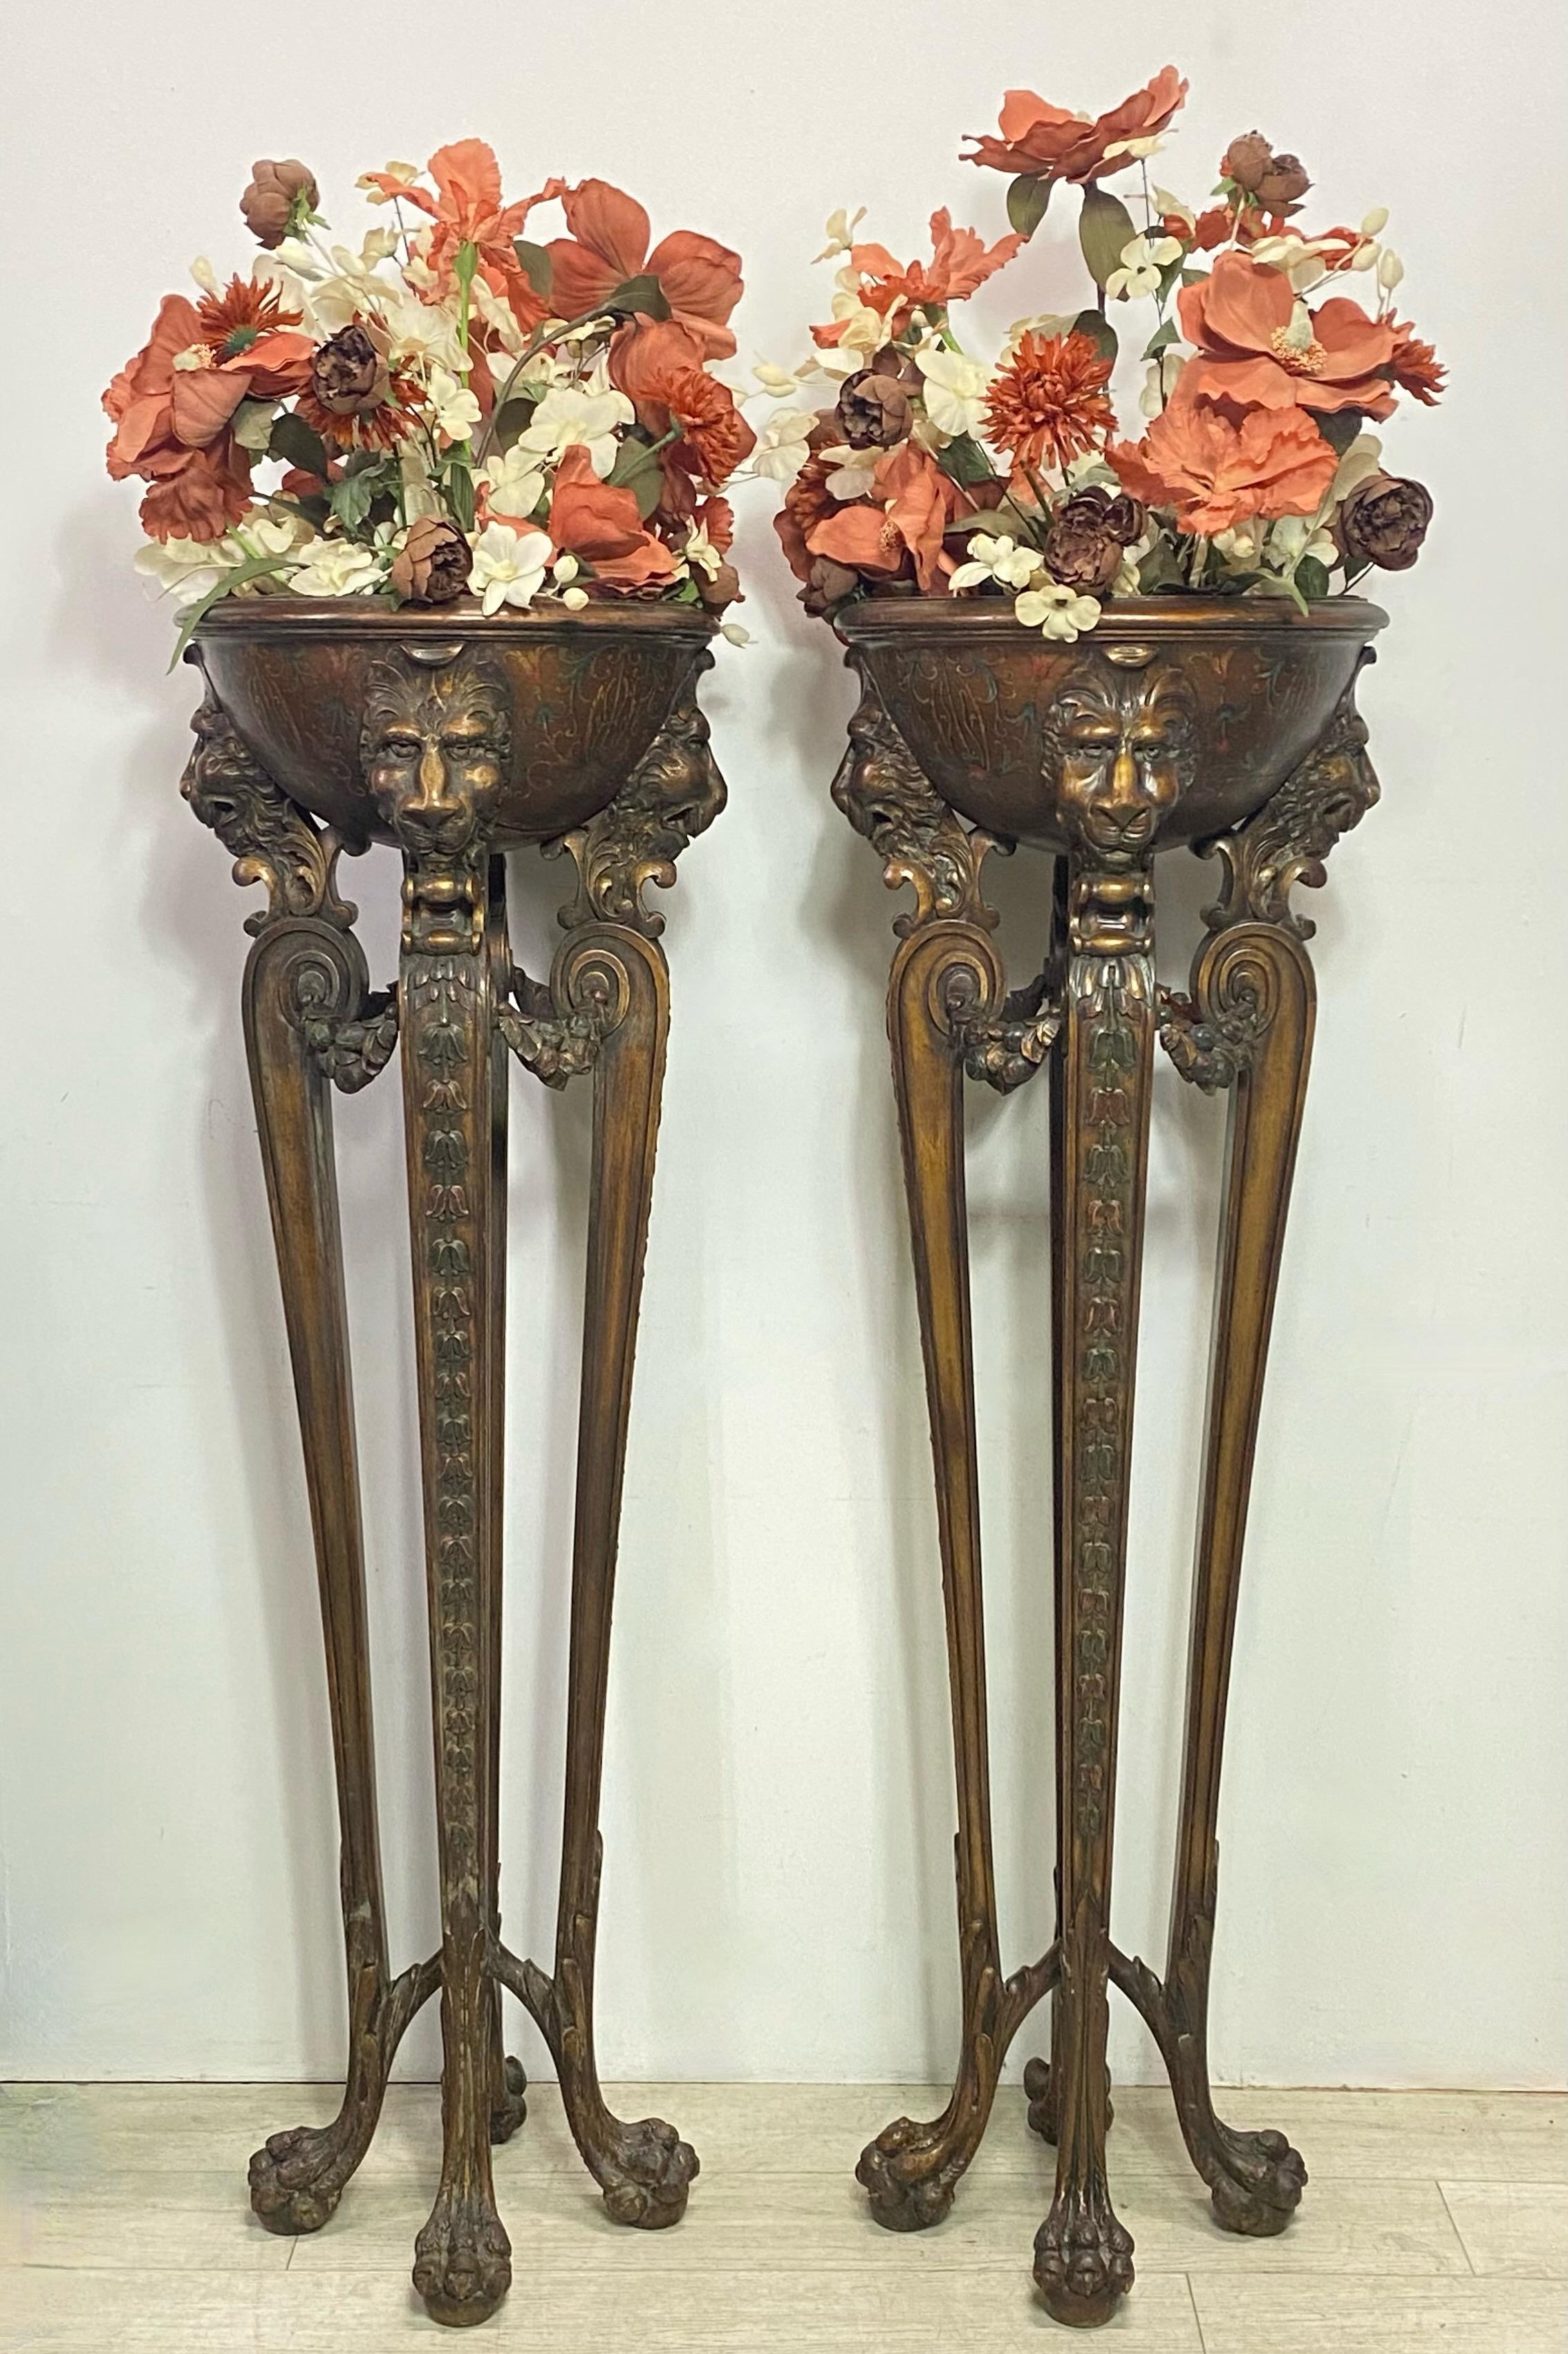 A pair of tall elaborately carved and painted walnut plant stands with wonderfully detailed lion faces and hairy paw feet, having their original hand hammered copper liner inserts.
Most likely European, circa 1920.